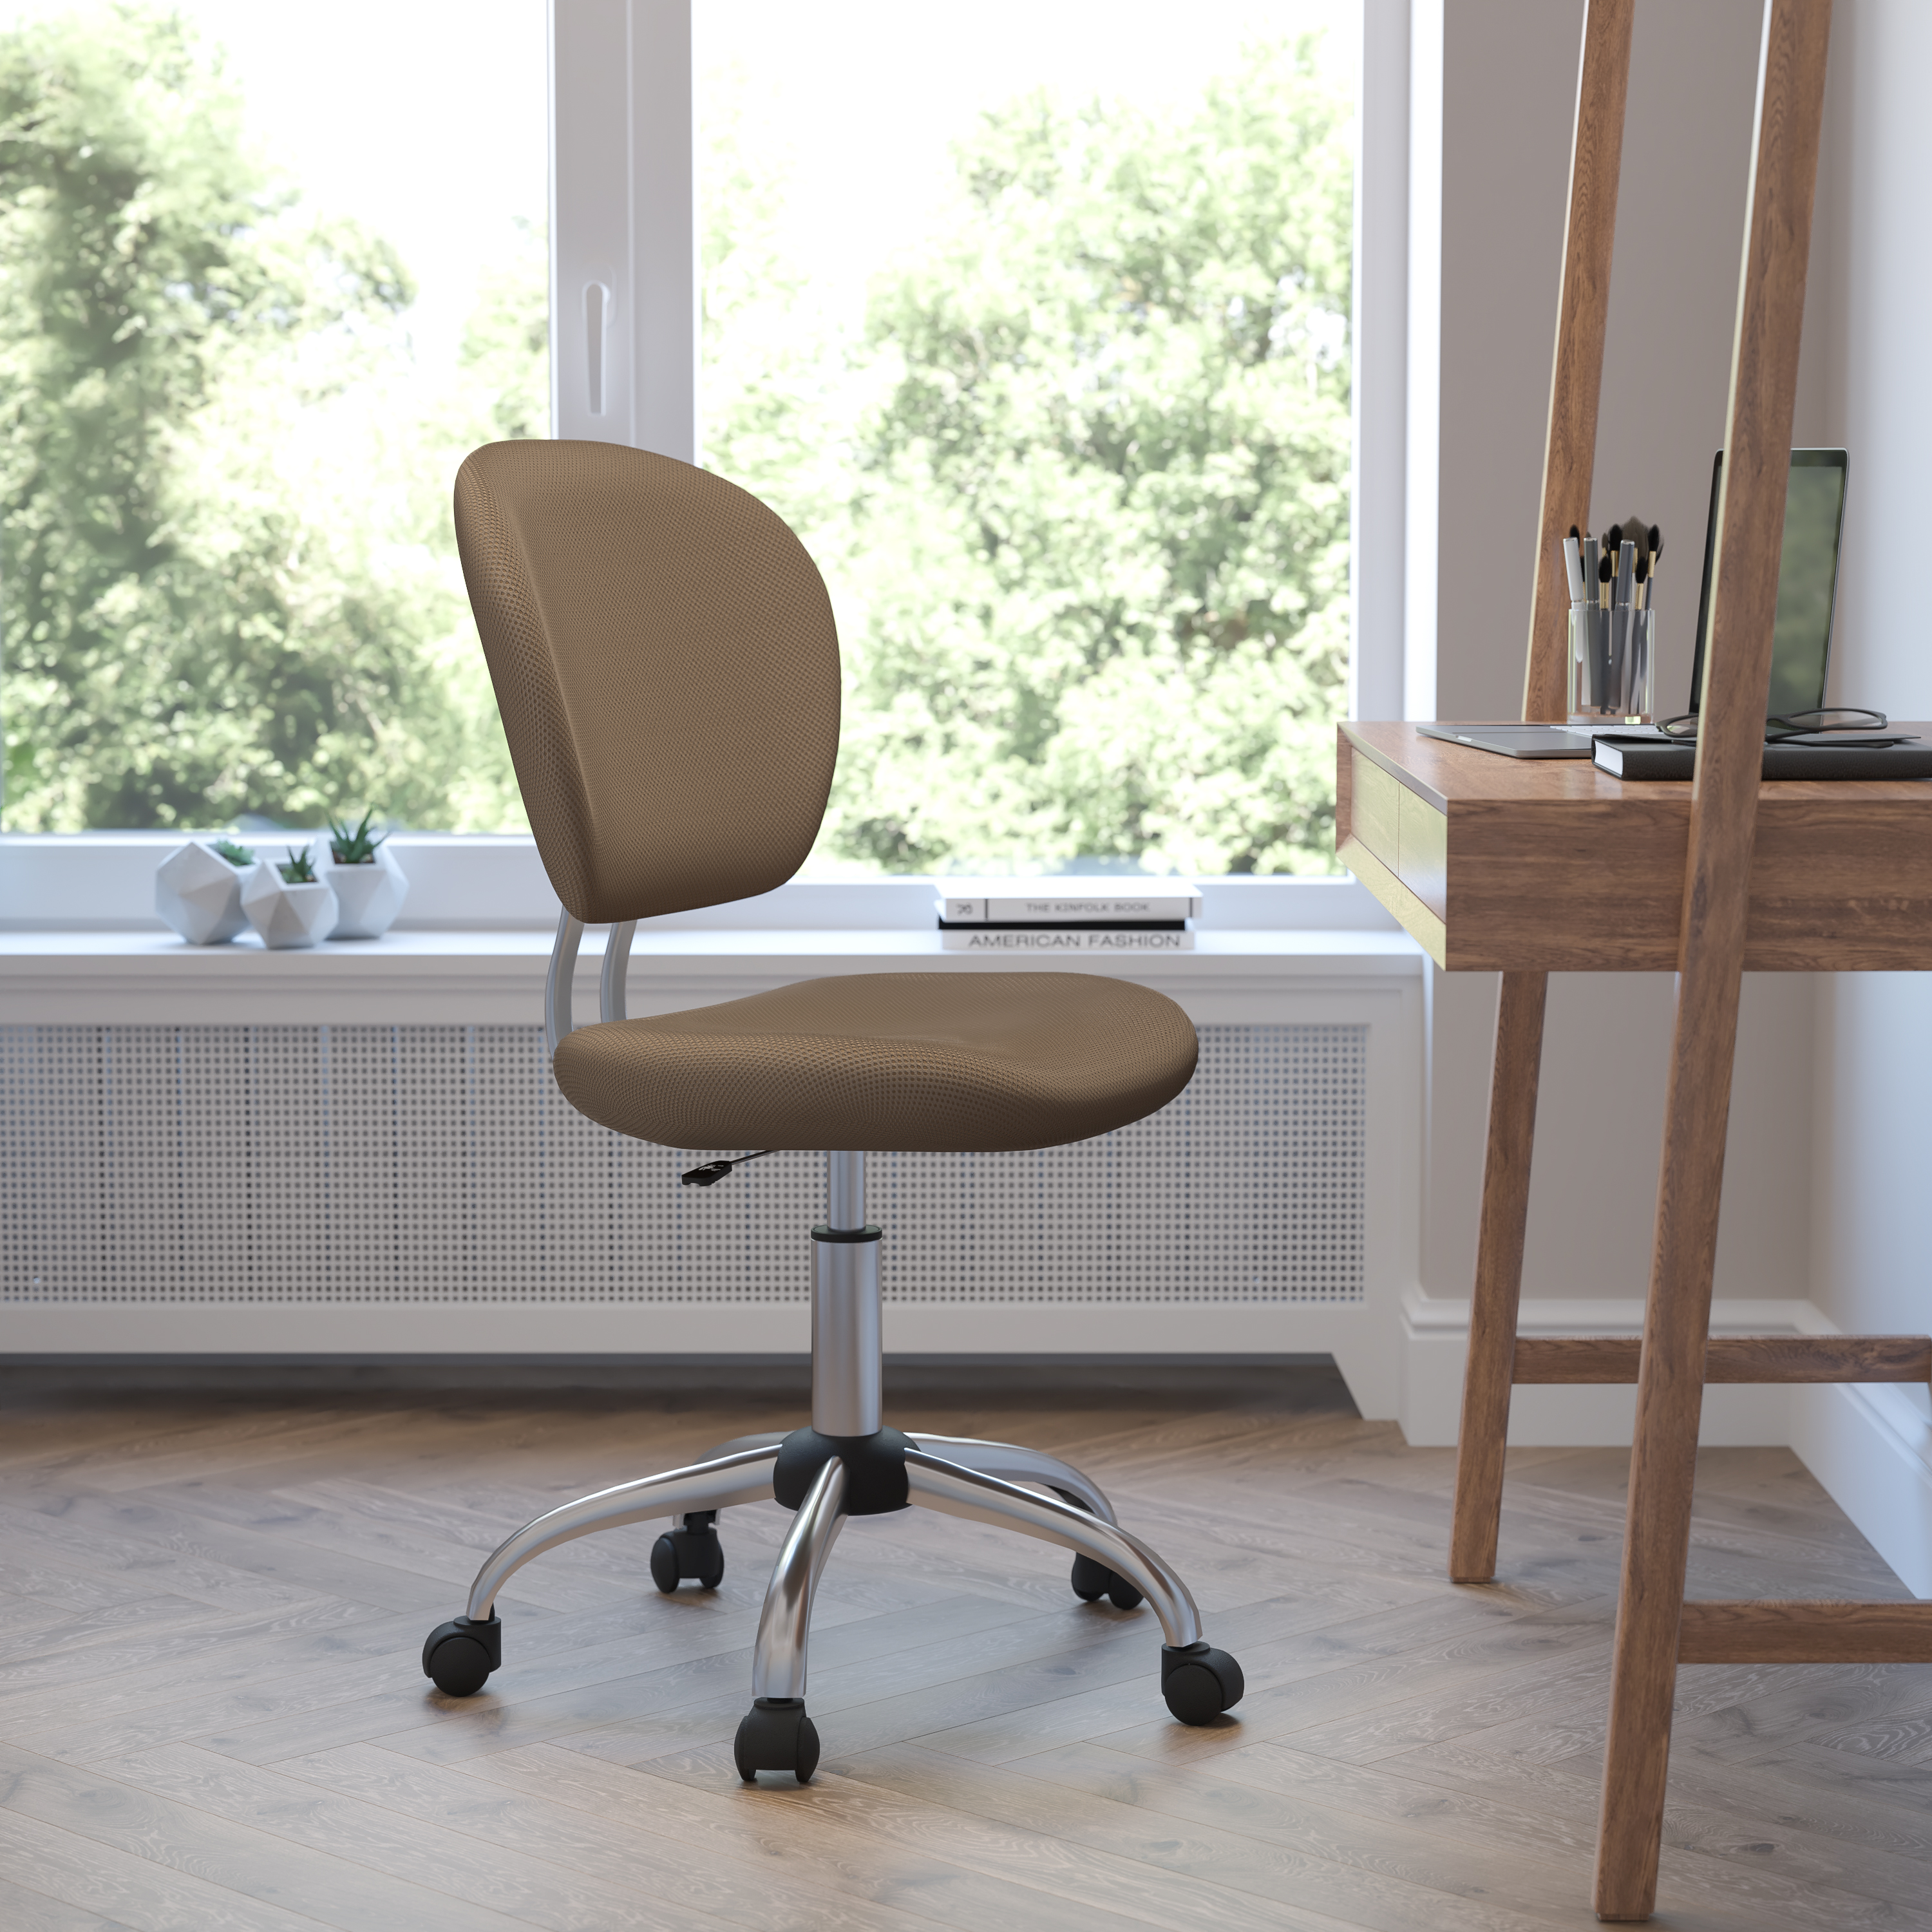 Emma + Oliver Mid-Back Coffee Brown Mesh Swivel Task Office Chair with Chrome Base - image 1 of 13